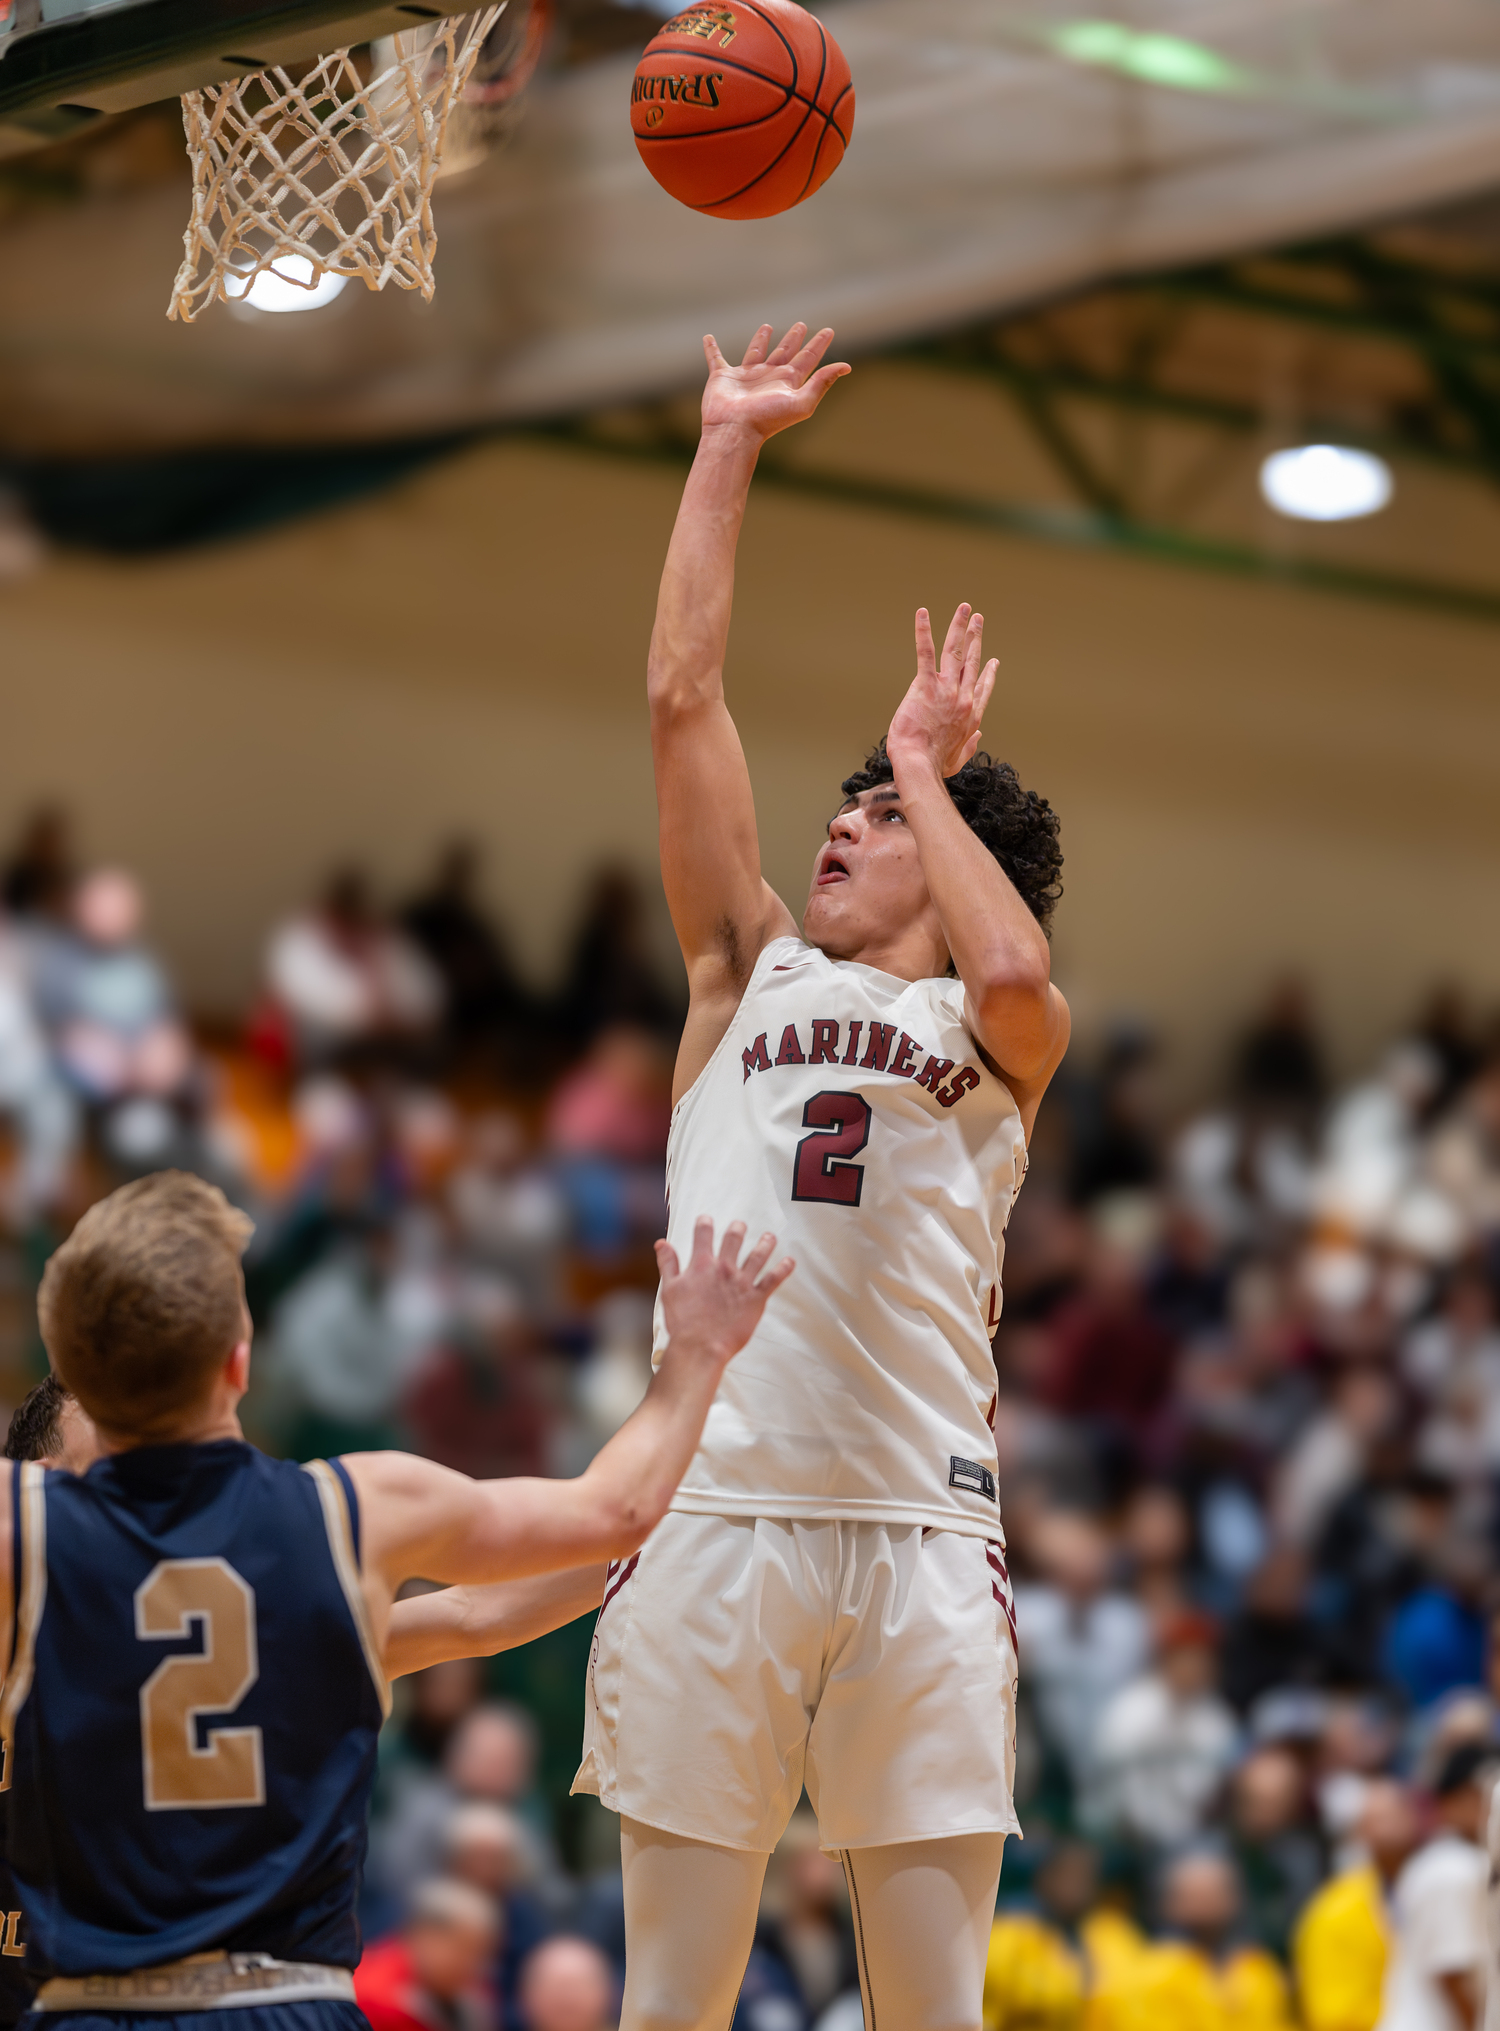 Southampton sophomore Alex Franklin was a driving force of the offense in the first quarter of Saturday's county championship, scoring 11 of his 17 points in the frame.   RON ESPOSITO